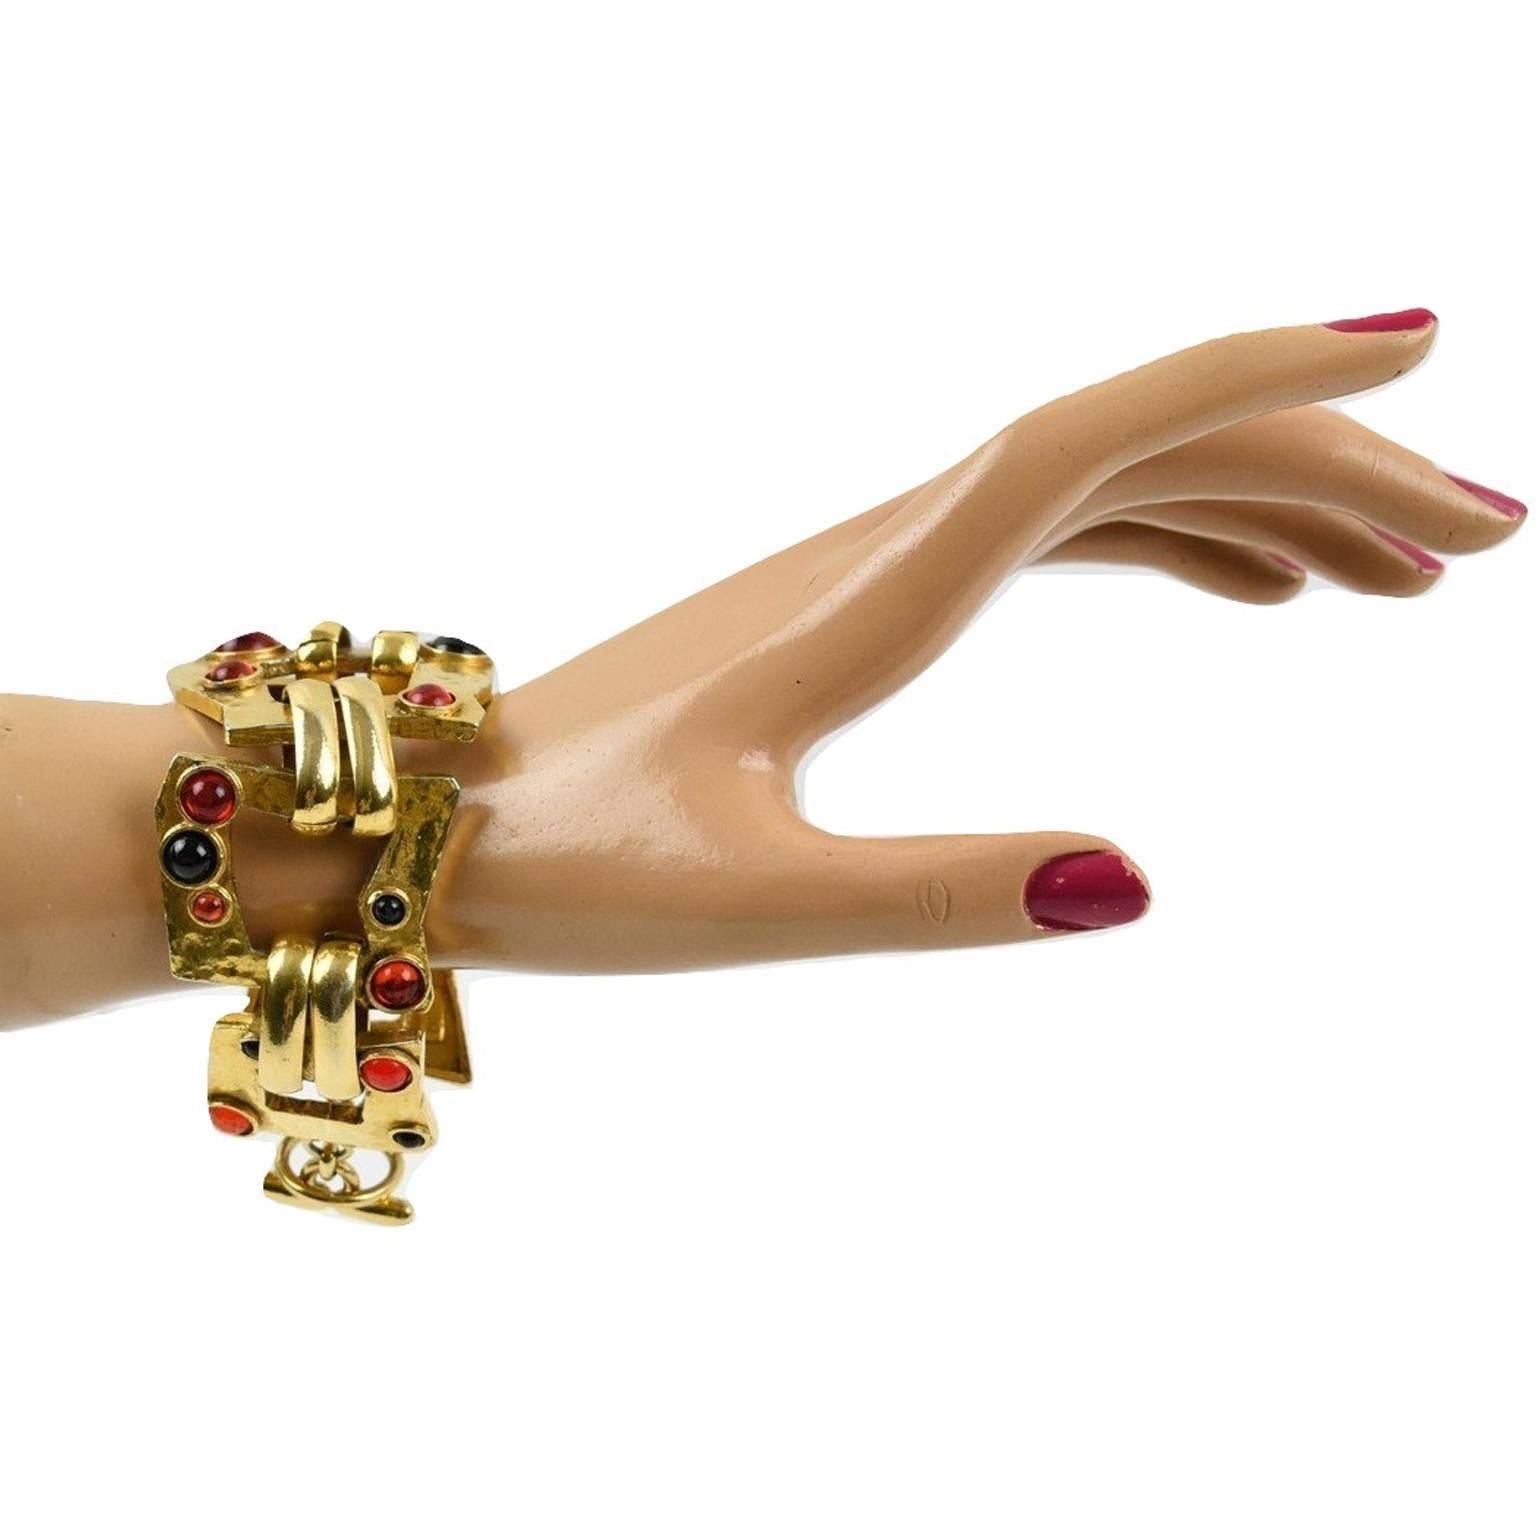 Very chic Mercedes Robirosa Paris link bracelet. Modernist fantasy style with gilt metal all textured and pierced, ornate with red and black Gripoix poured glass cabochons. There is a toggle closing clasp, and each link has a signature at the